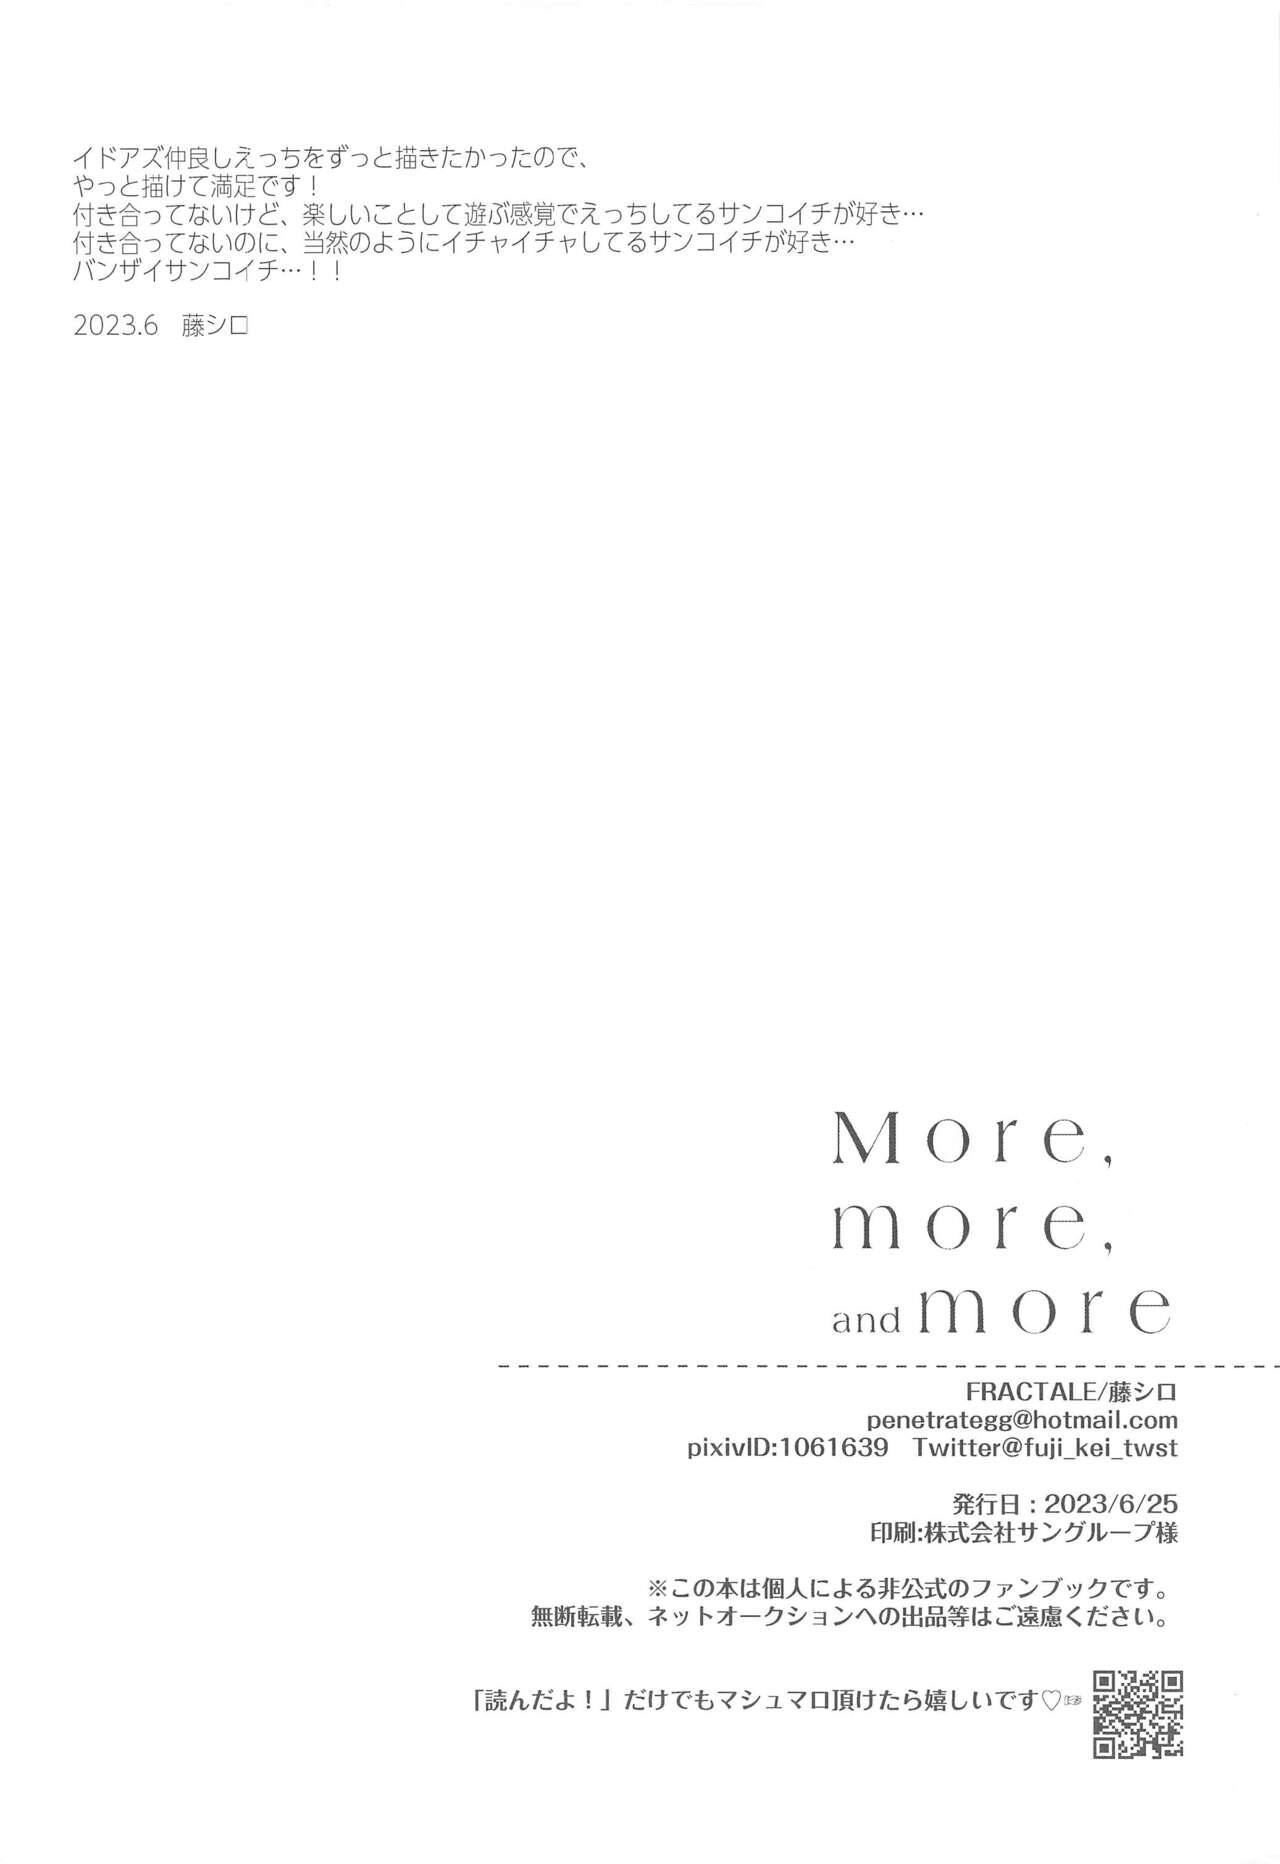 More, more, and more 22